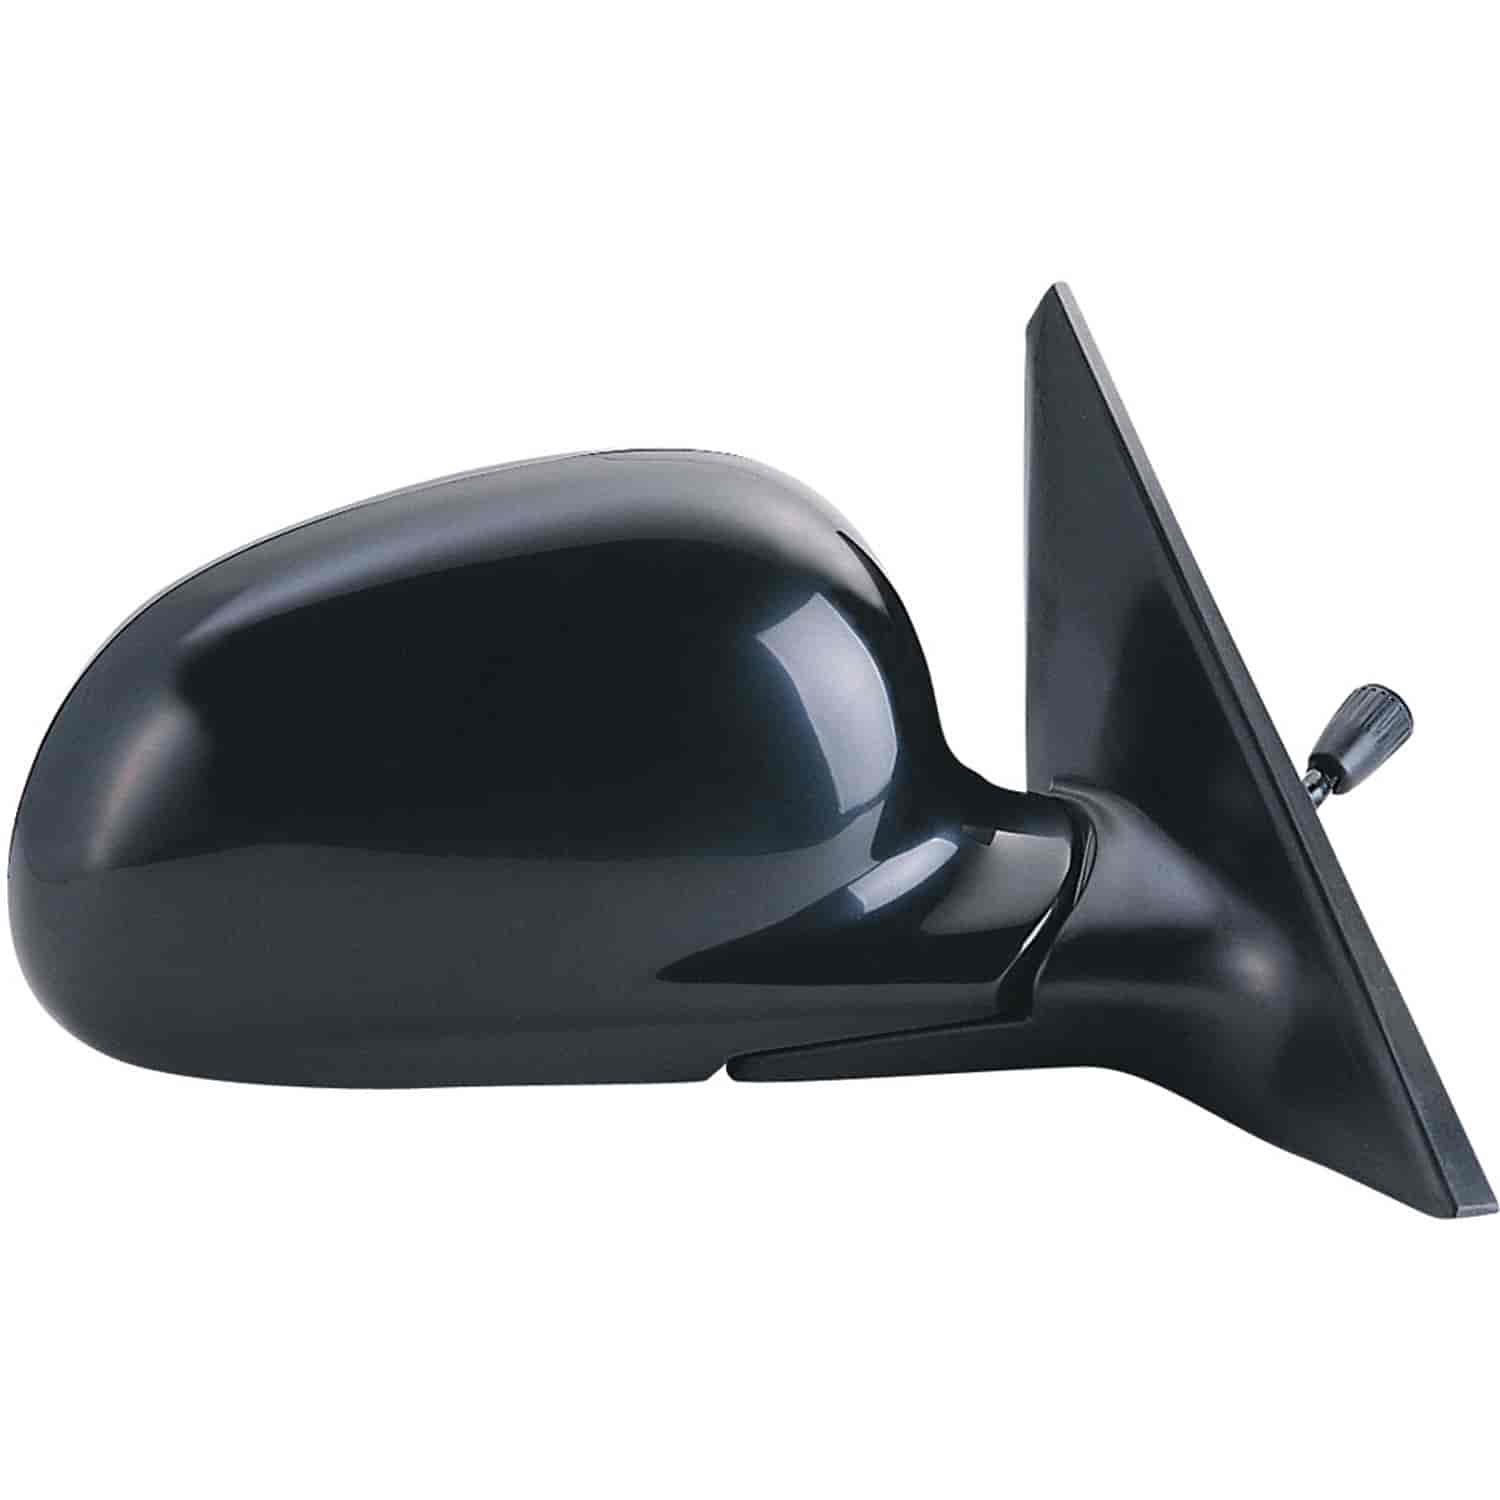 OEM Style Replacement mirror for 92-95 Honda Civic Sedan passenger side mirror tested to fit and fun